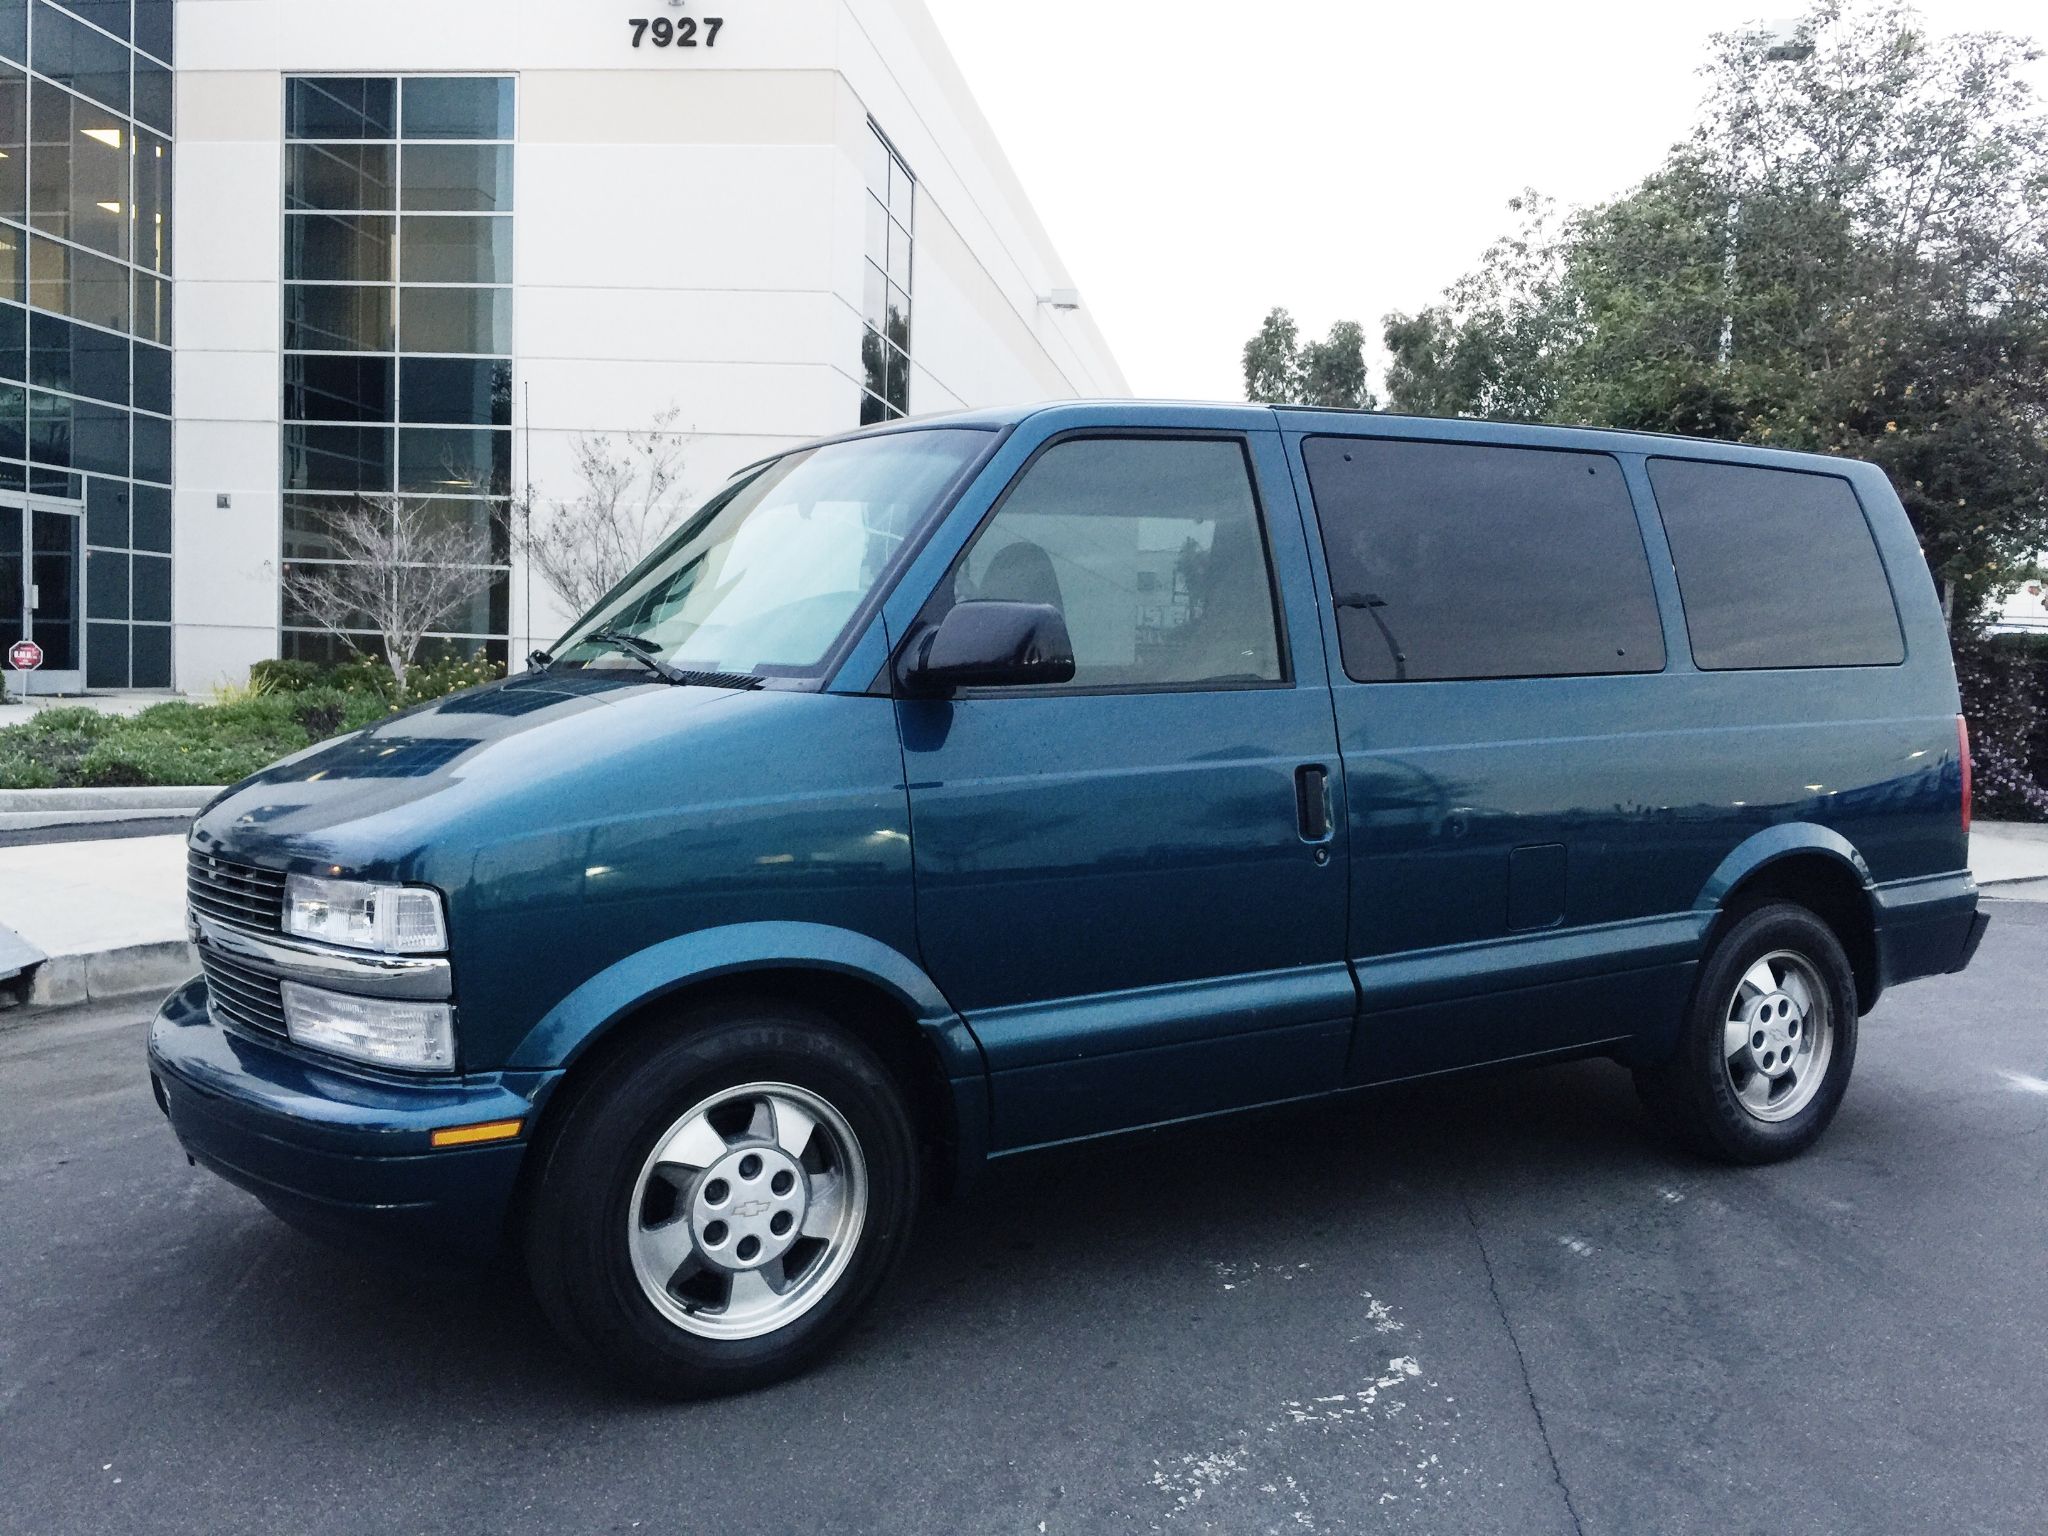 Used 2003 Chevrolet Astro Passenger at City Cars Warehouse Inc